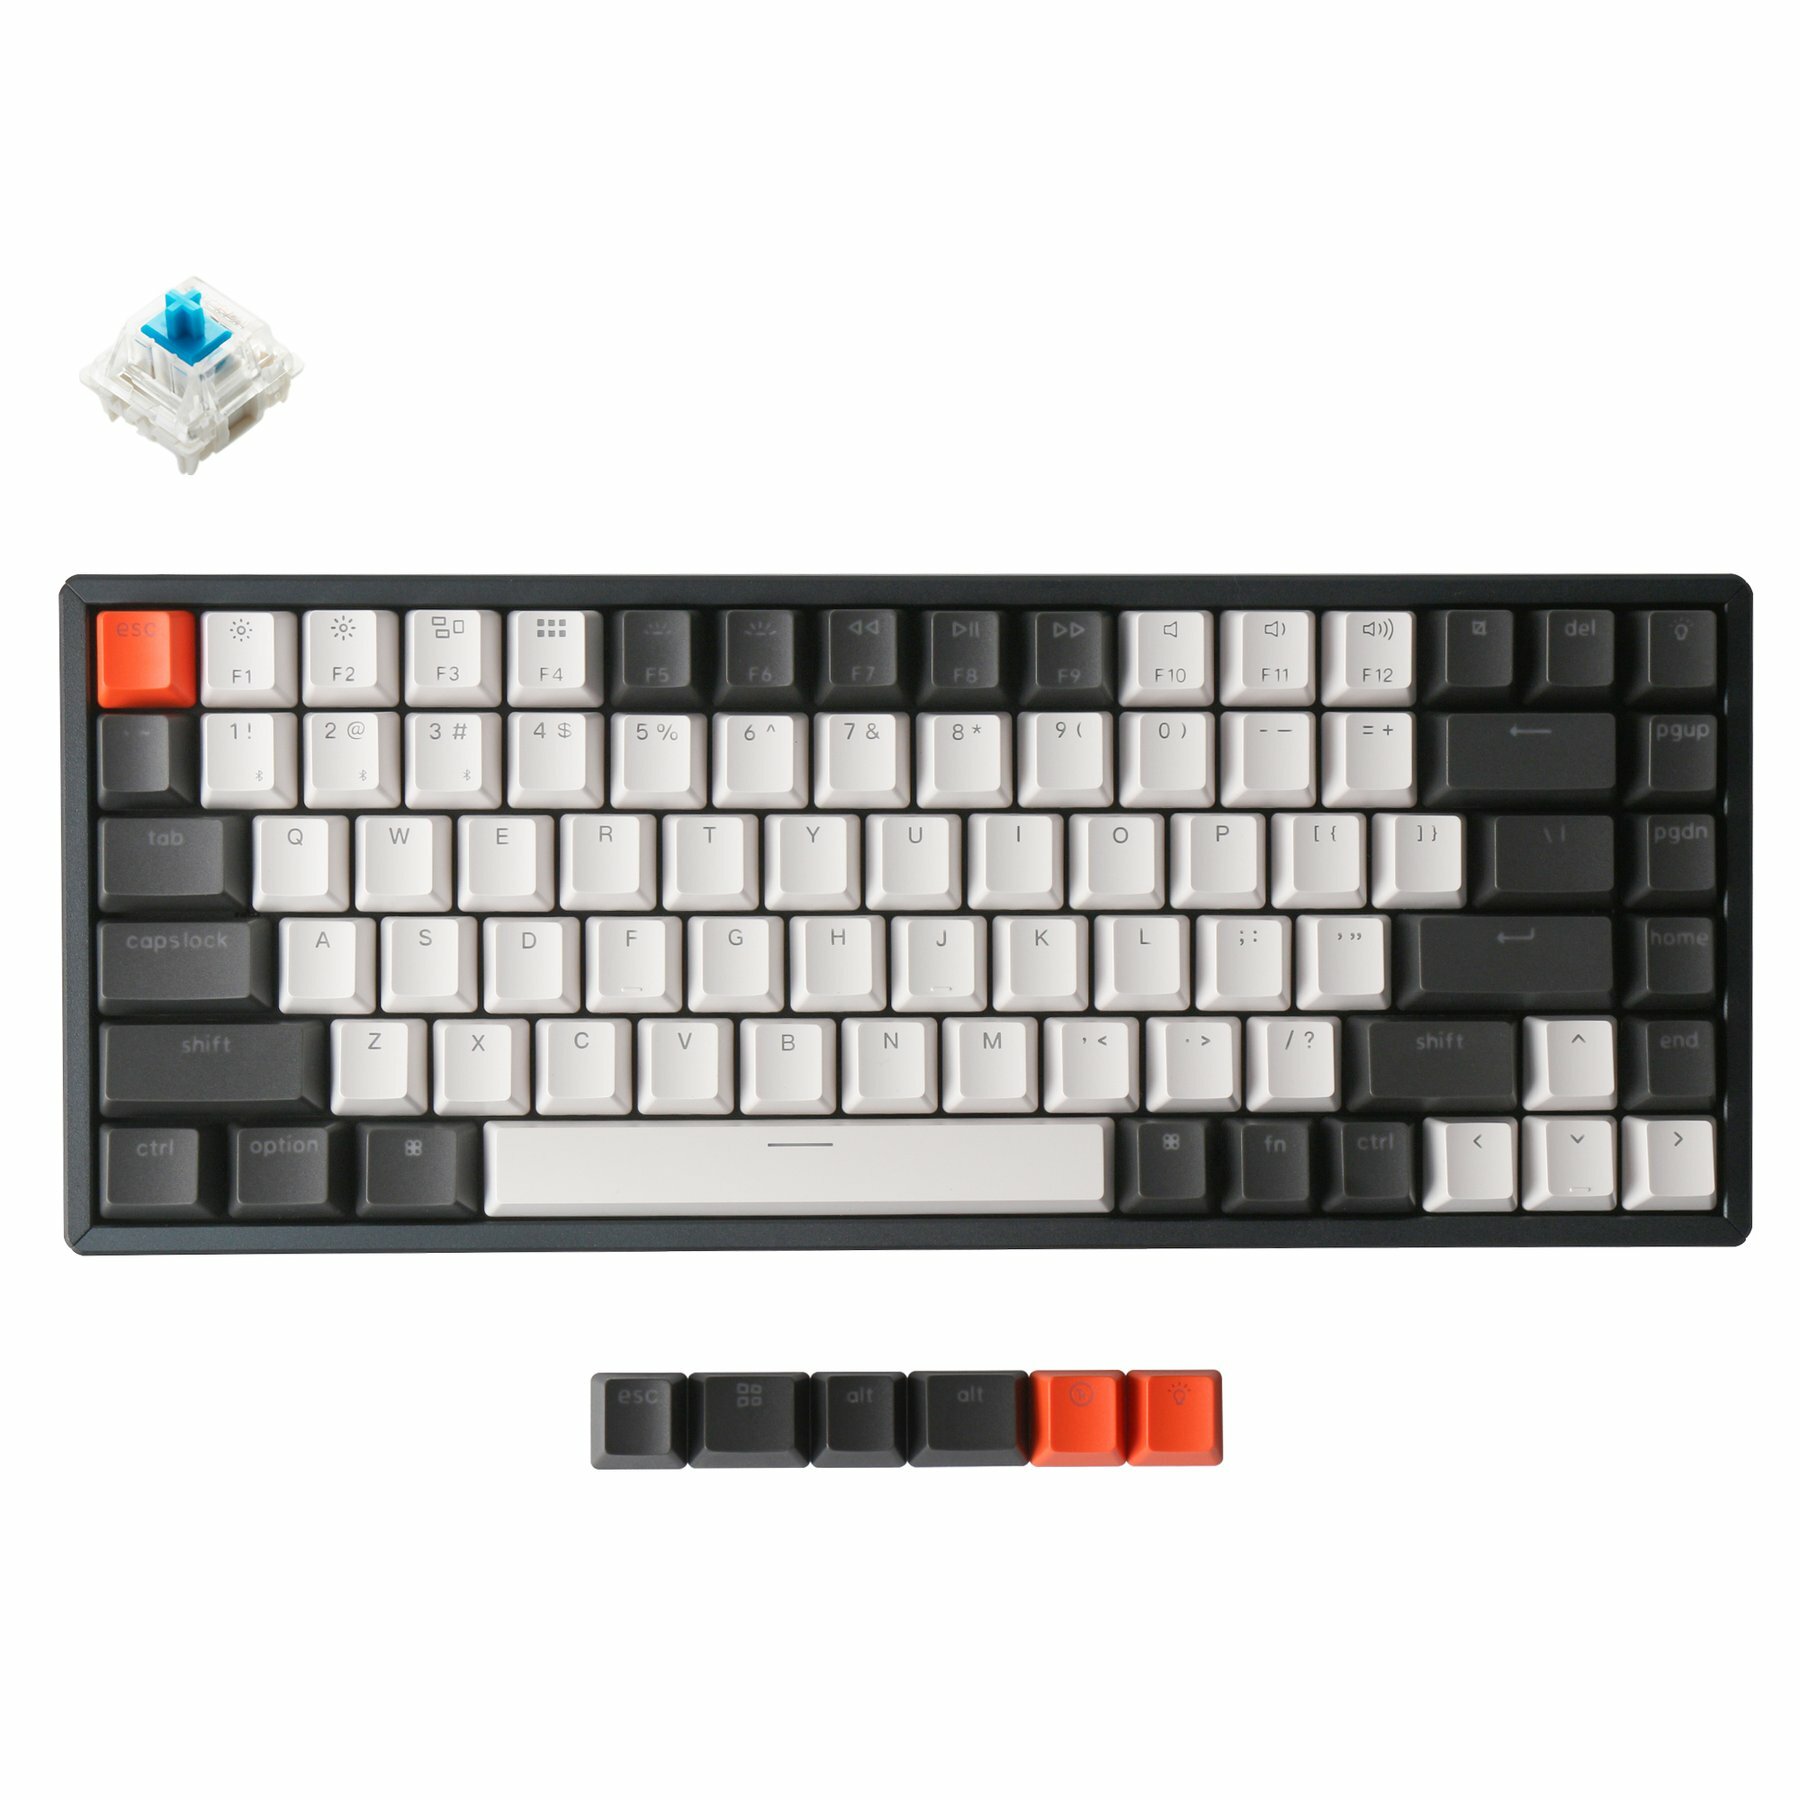 Keychron-K2-hot-swappable-wireless-mechanical-keyboard-for-Mac-Windows-iOS-Gateron-switch-blue-with-type-C-RGB-white-backlight-aluminum-frame_1800x1800